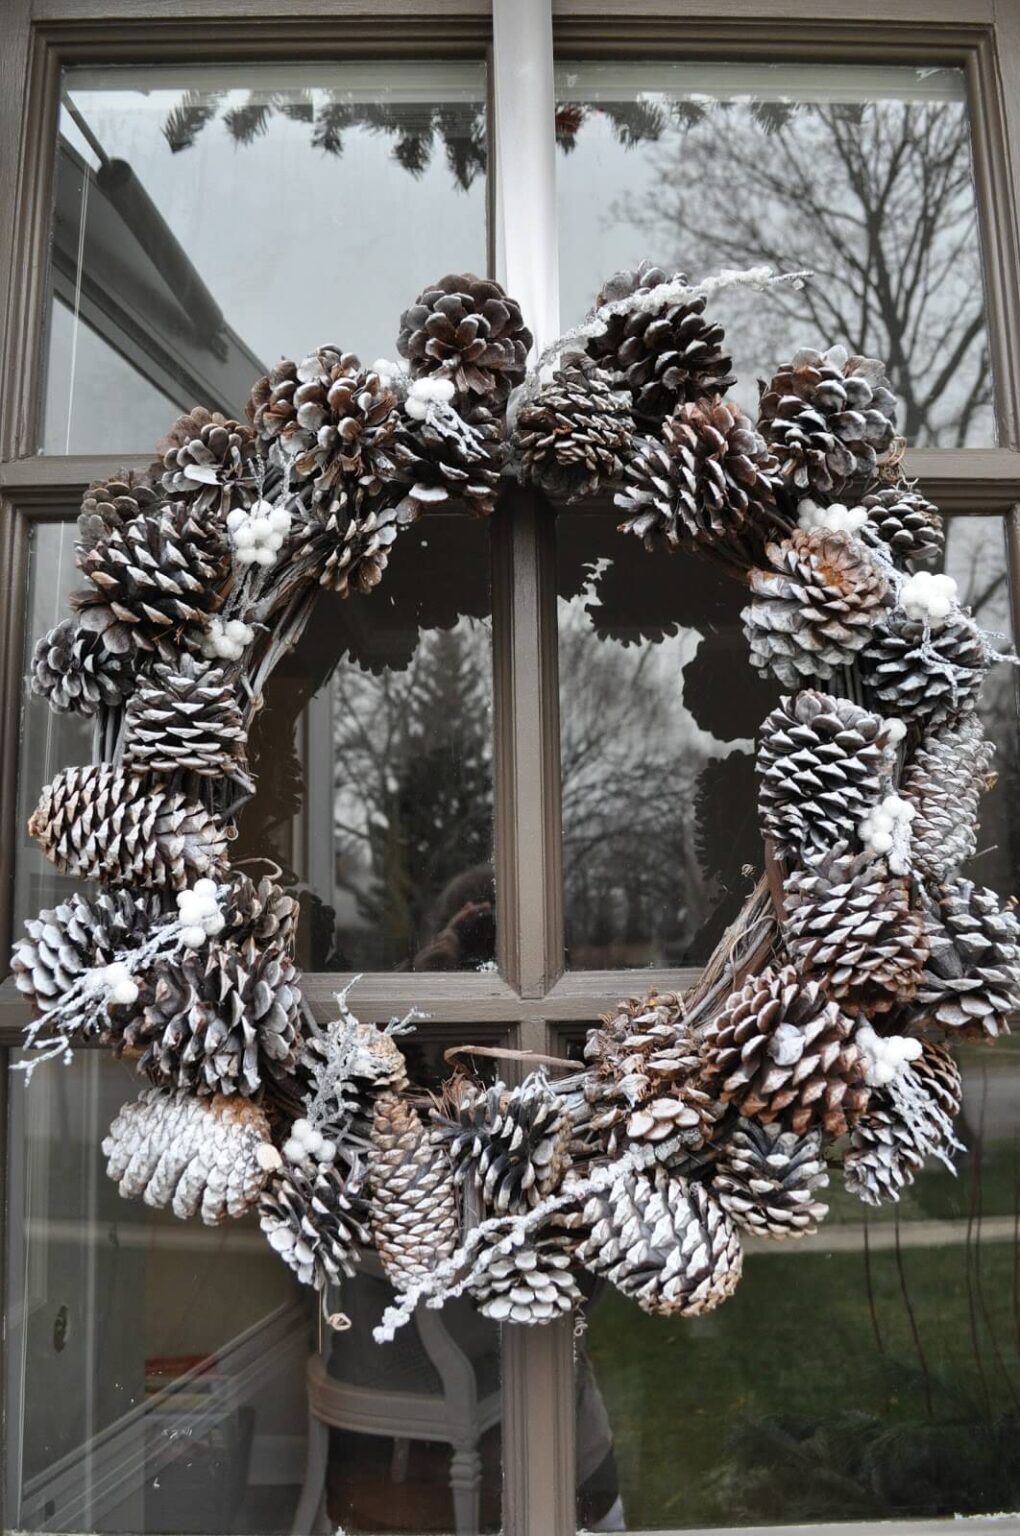 Creative Techniques Used In Diy Pinecone Wreaths That Will Impress And Amaze